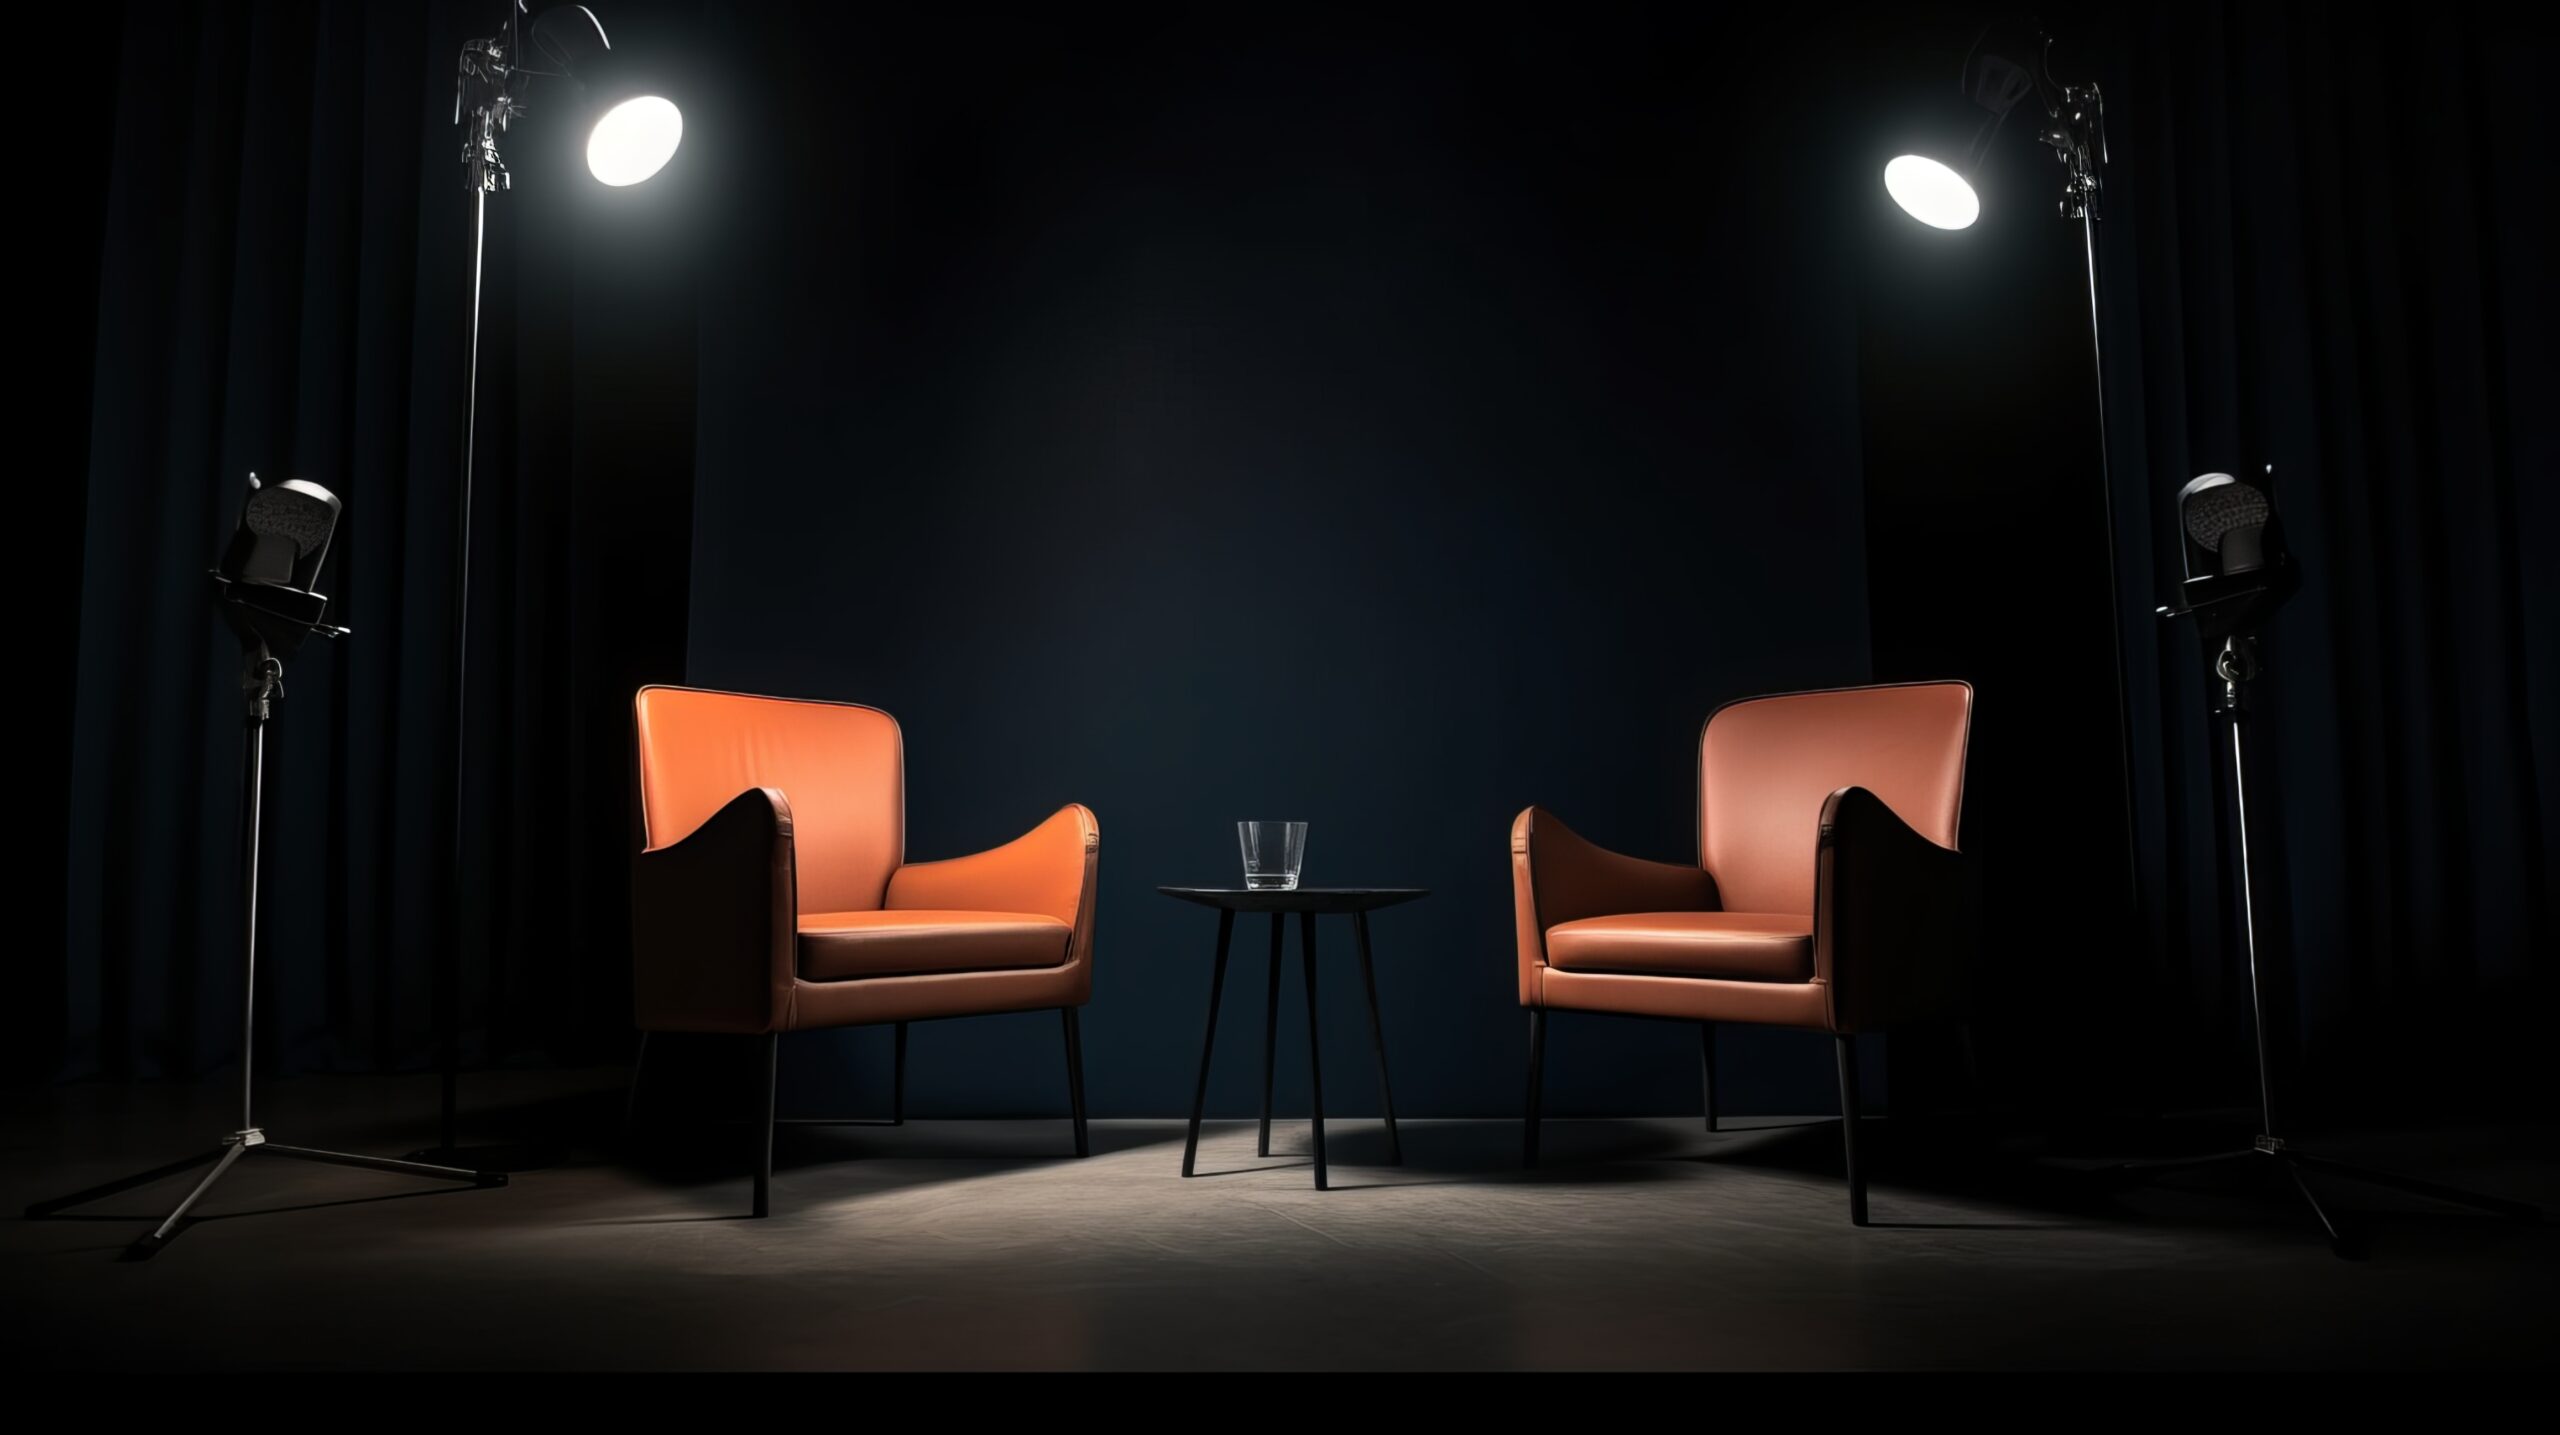 two chairs and spotlights in podcast or interview room on dark background as a wide banner for media conversations or podcast streamers concepts with copyspace